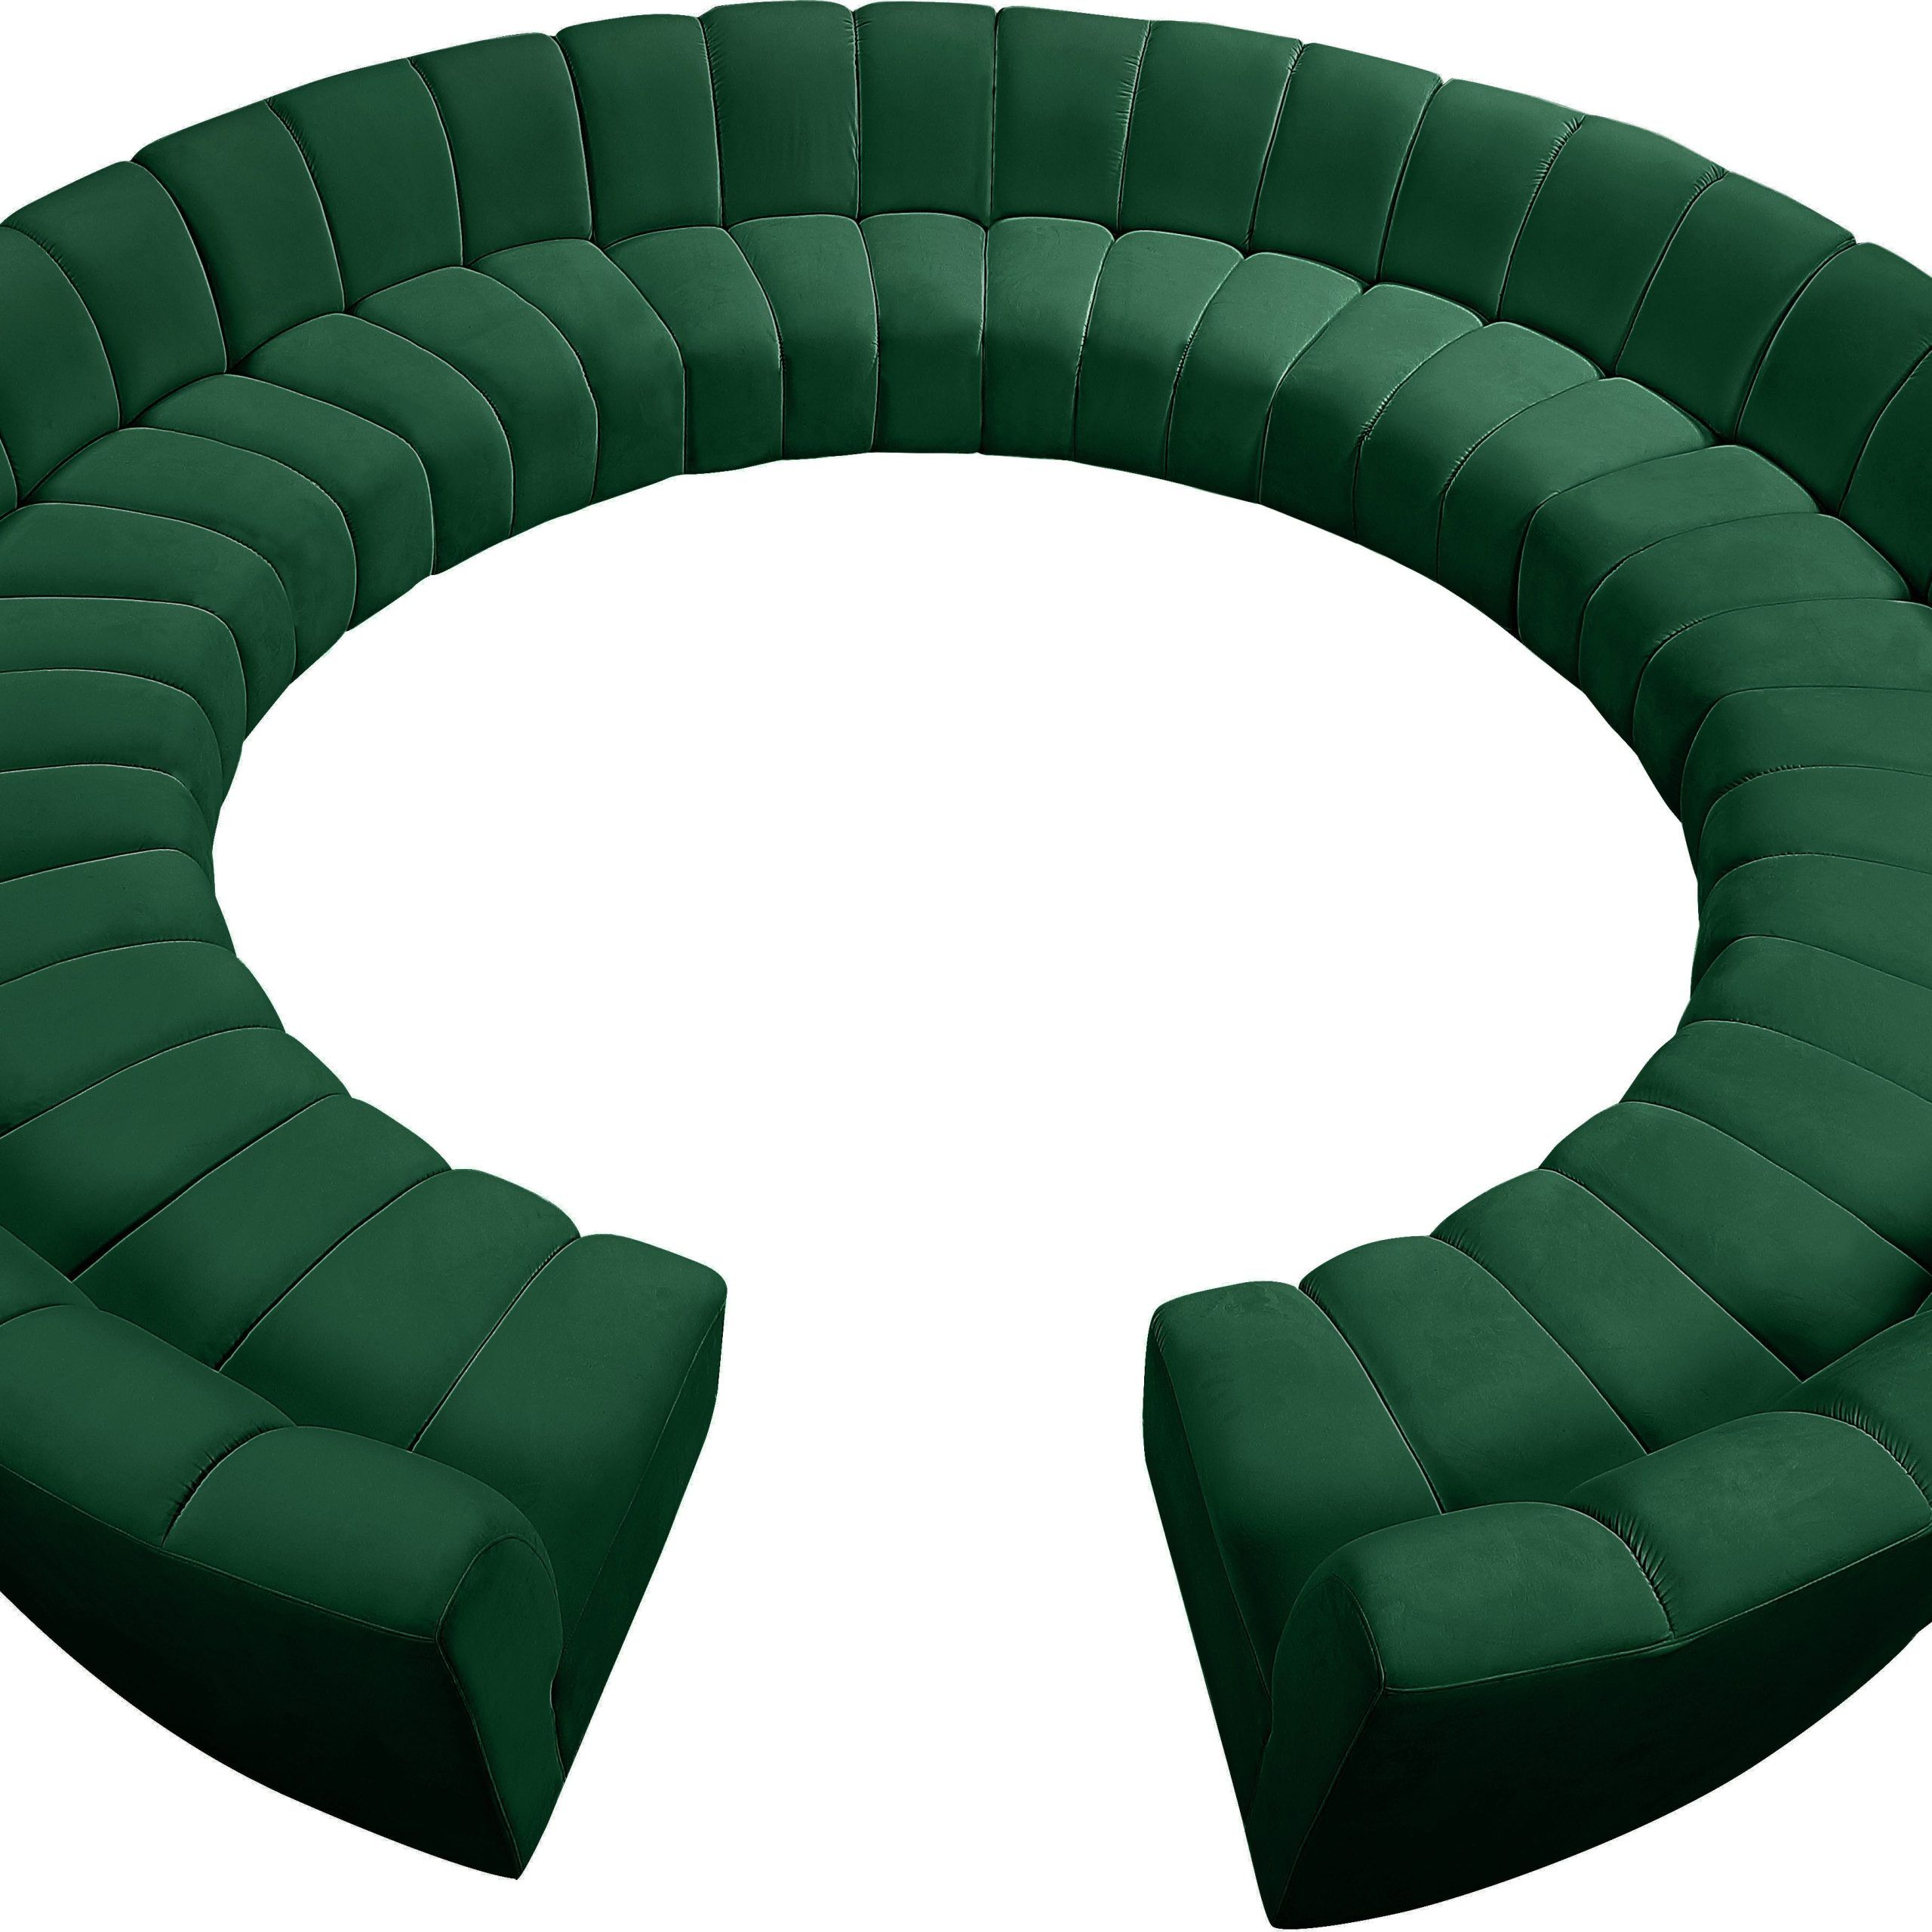 Meridian Furniture Infinity Mrd 638green 12pc, Elegant And Eye Catching In Green Velvet Modular Sectionals (Gallery 5 of 20)